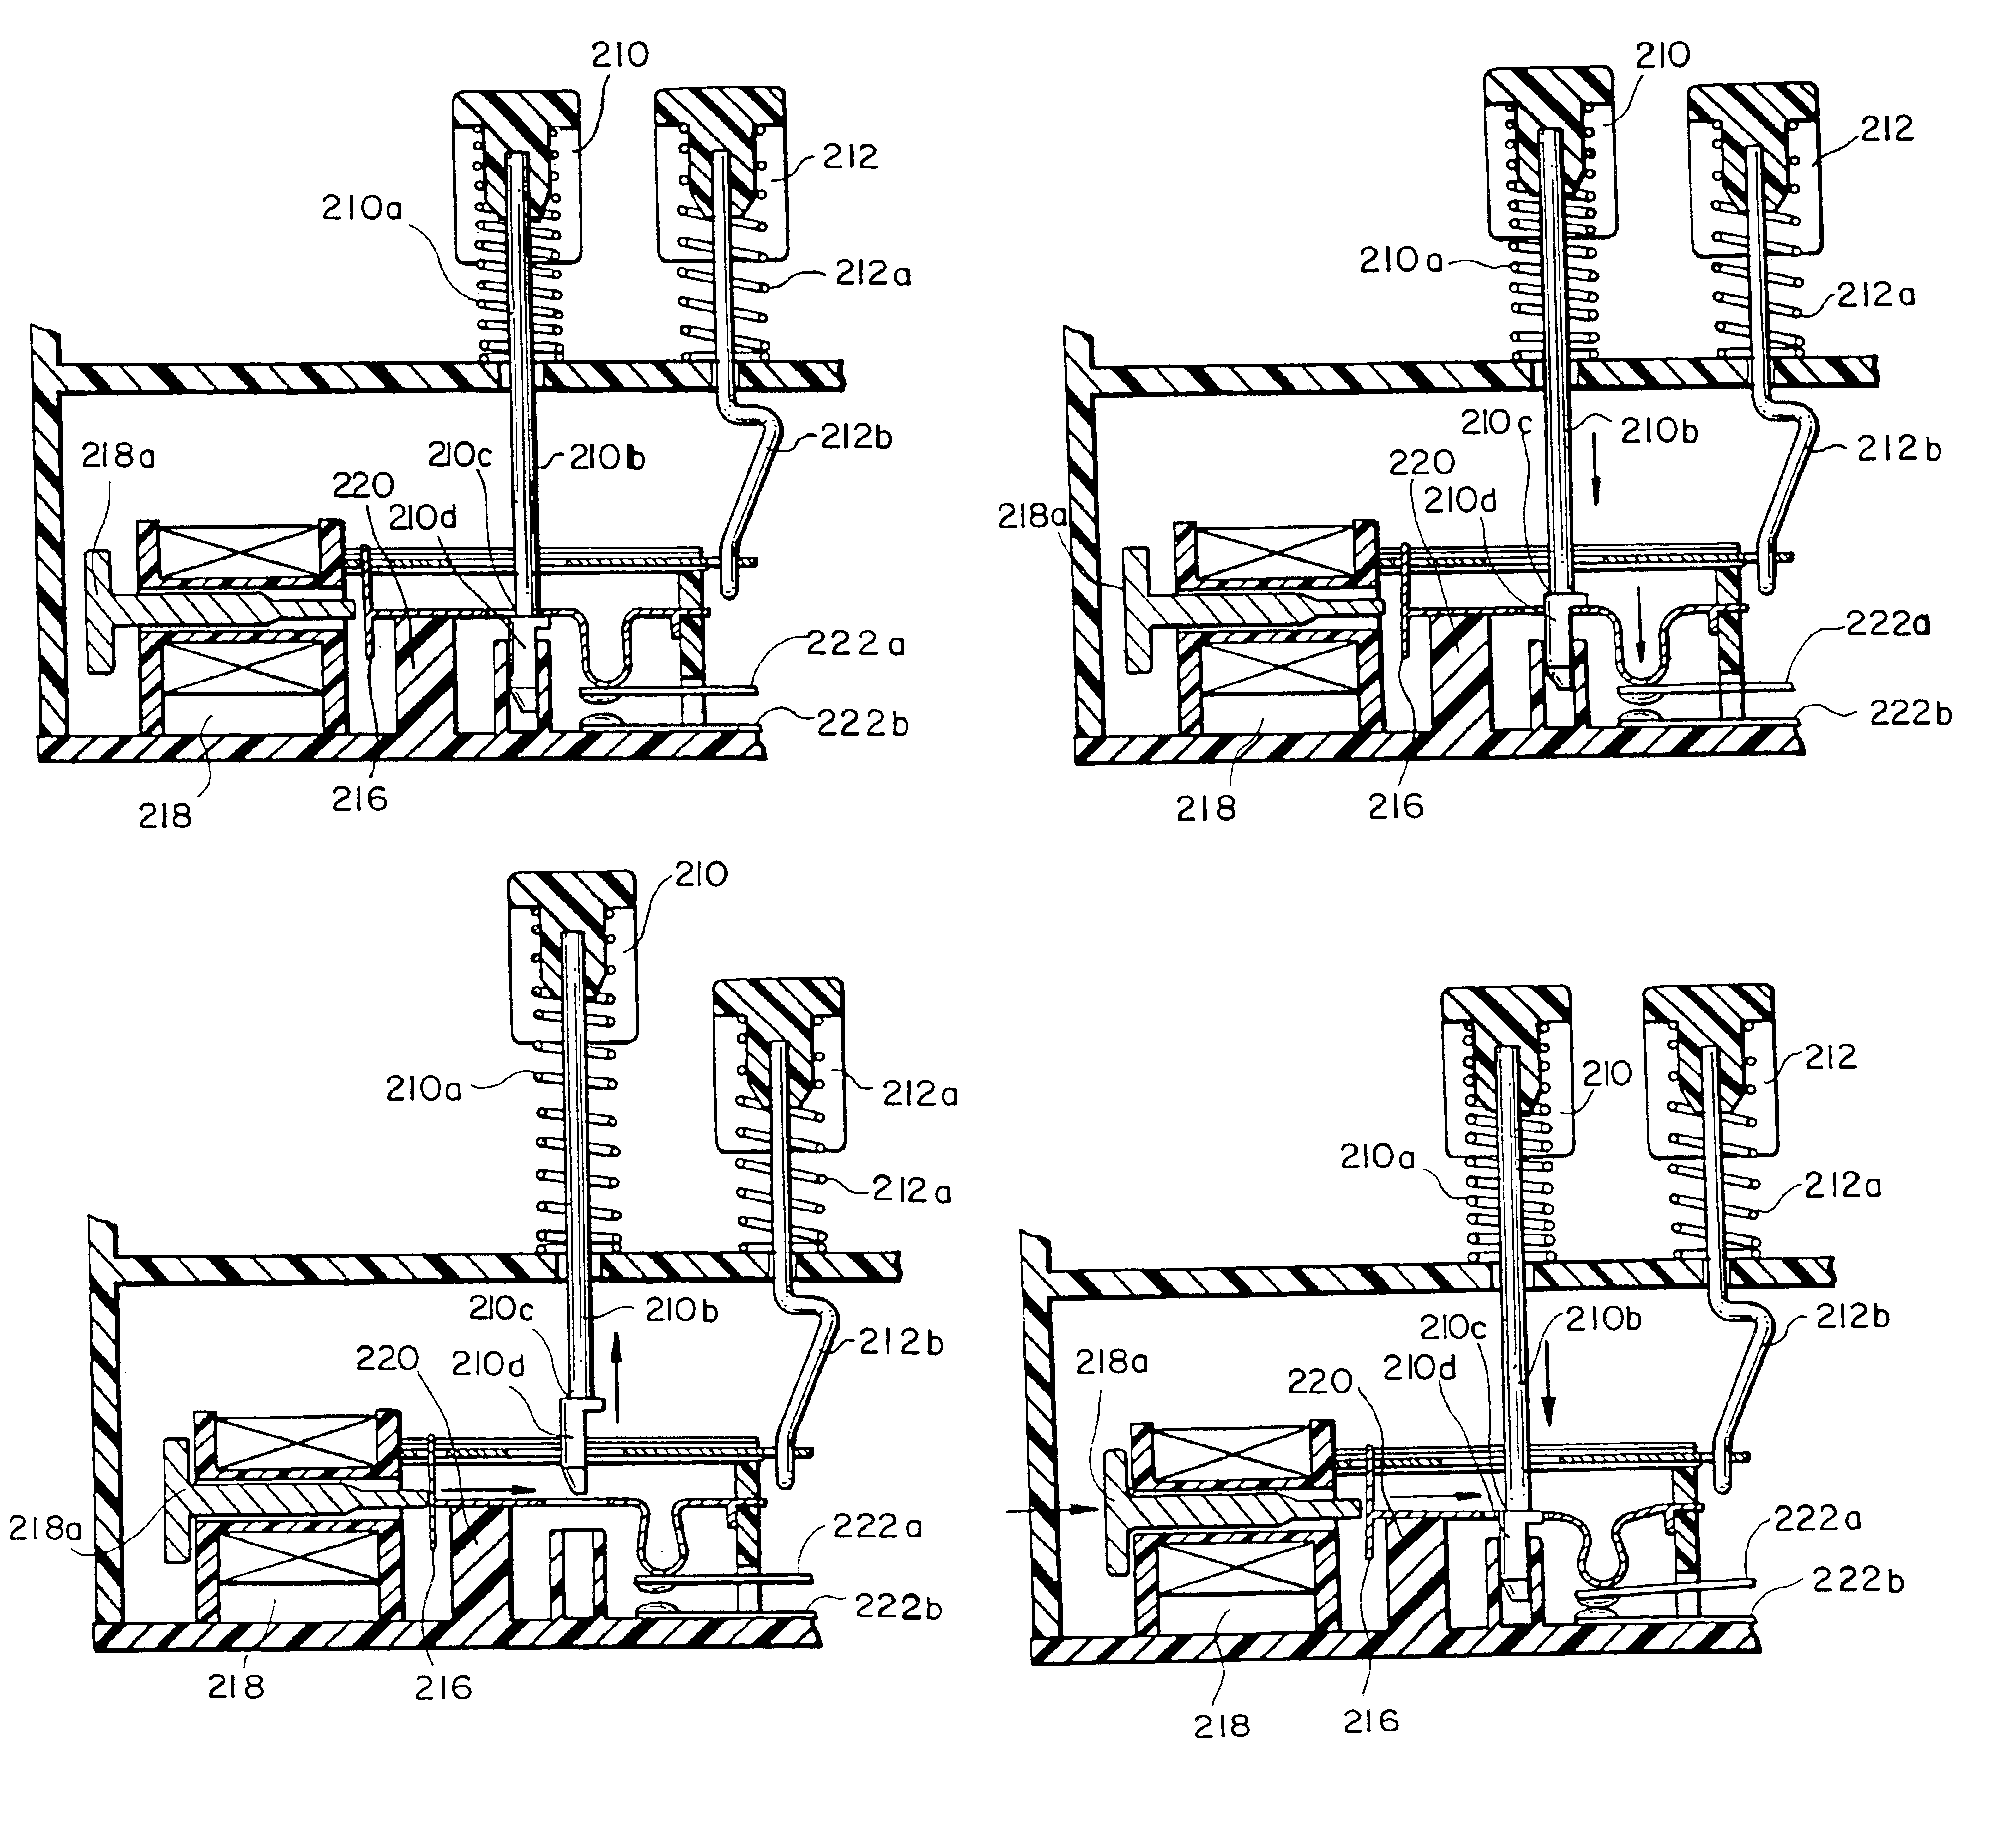 Reset lockout mechanism and independent trip mechanism for center latch circuit interrupting device